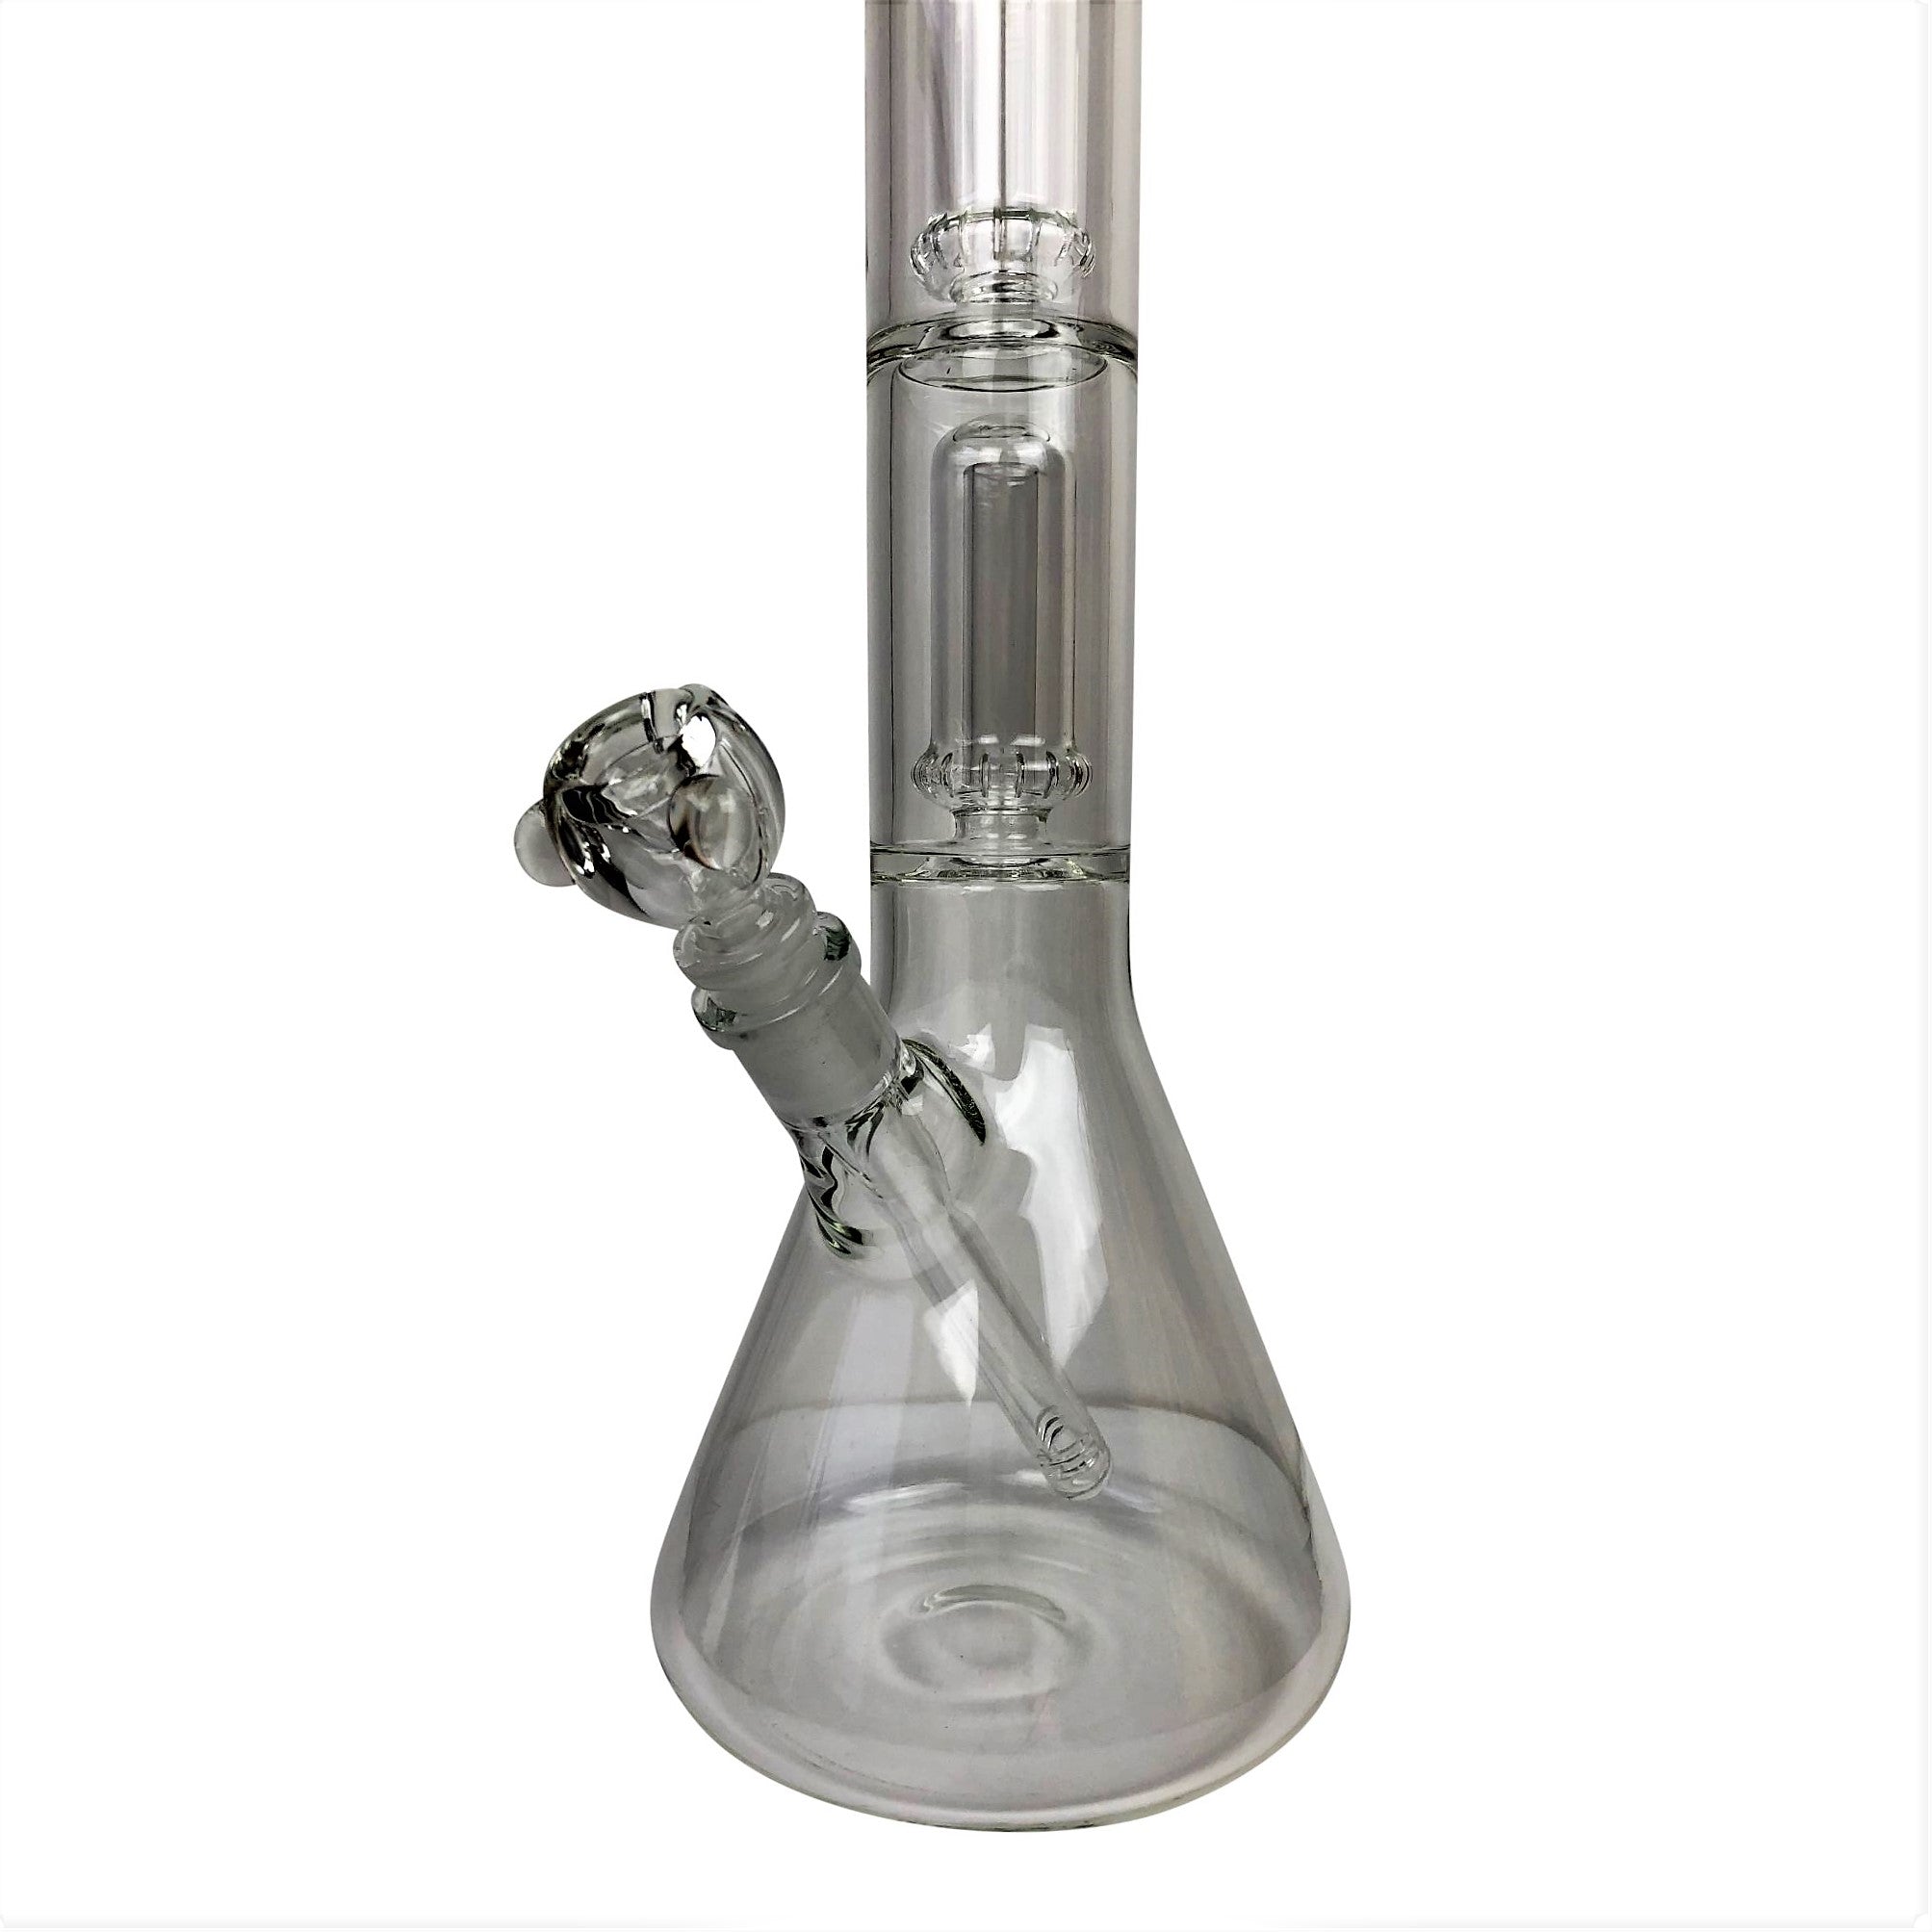 Amg Glass Massive 22 Inch Double Perc Glass Bong Water Pipe Glass City Pipes